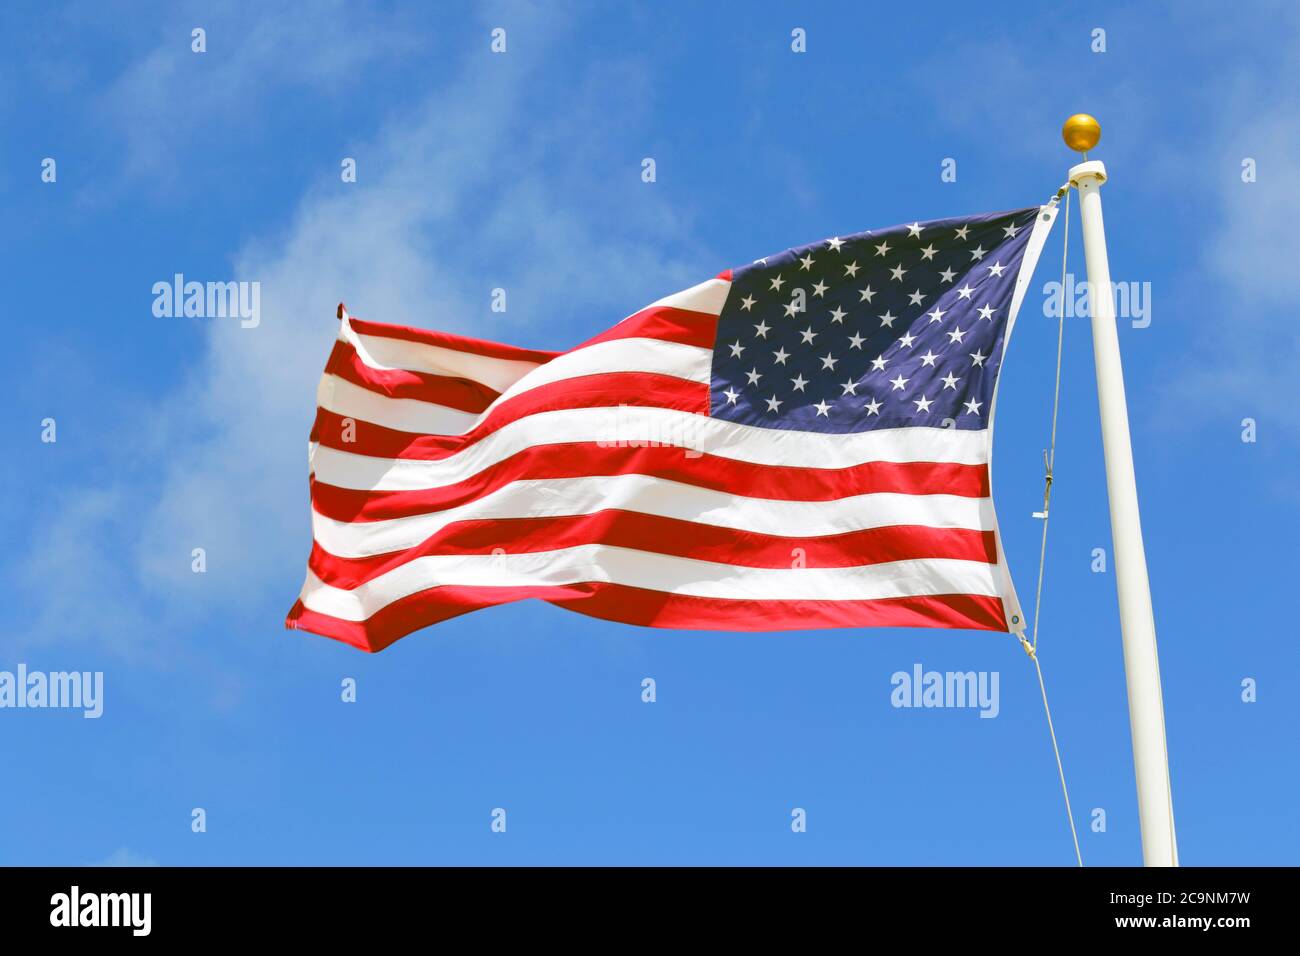 A United States of America flag proudly flying Stock Photo